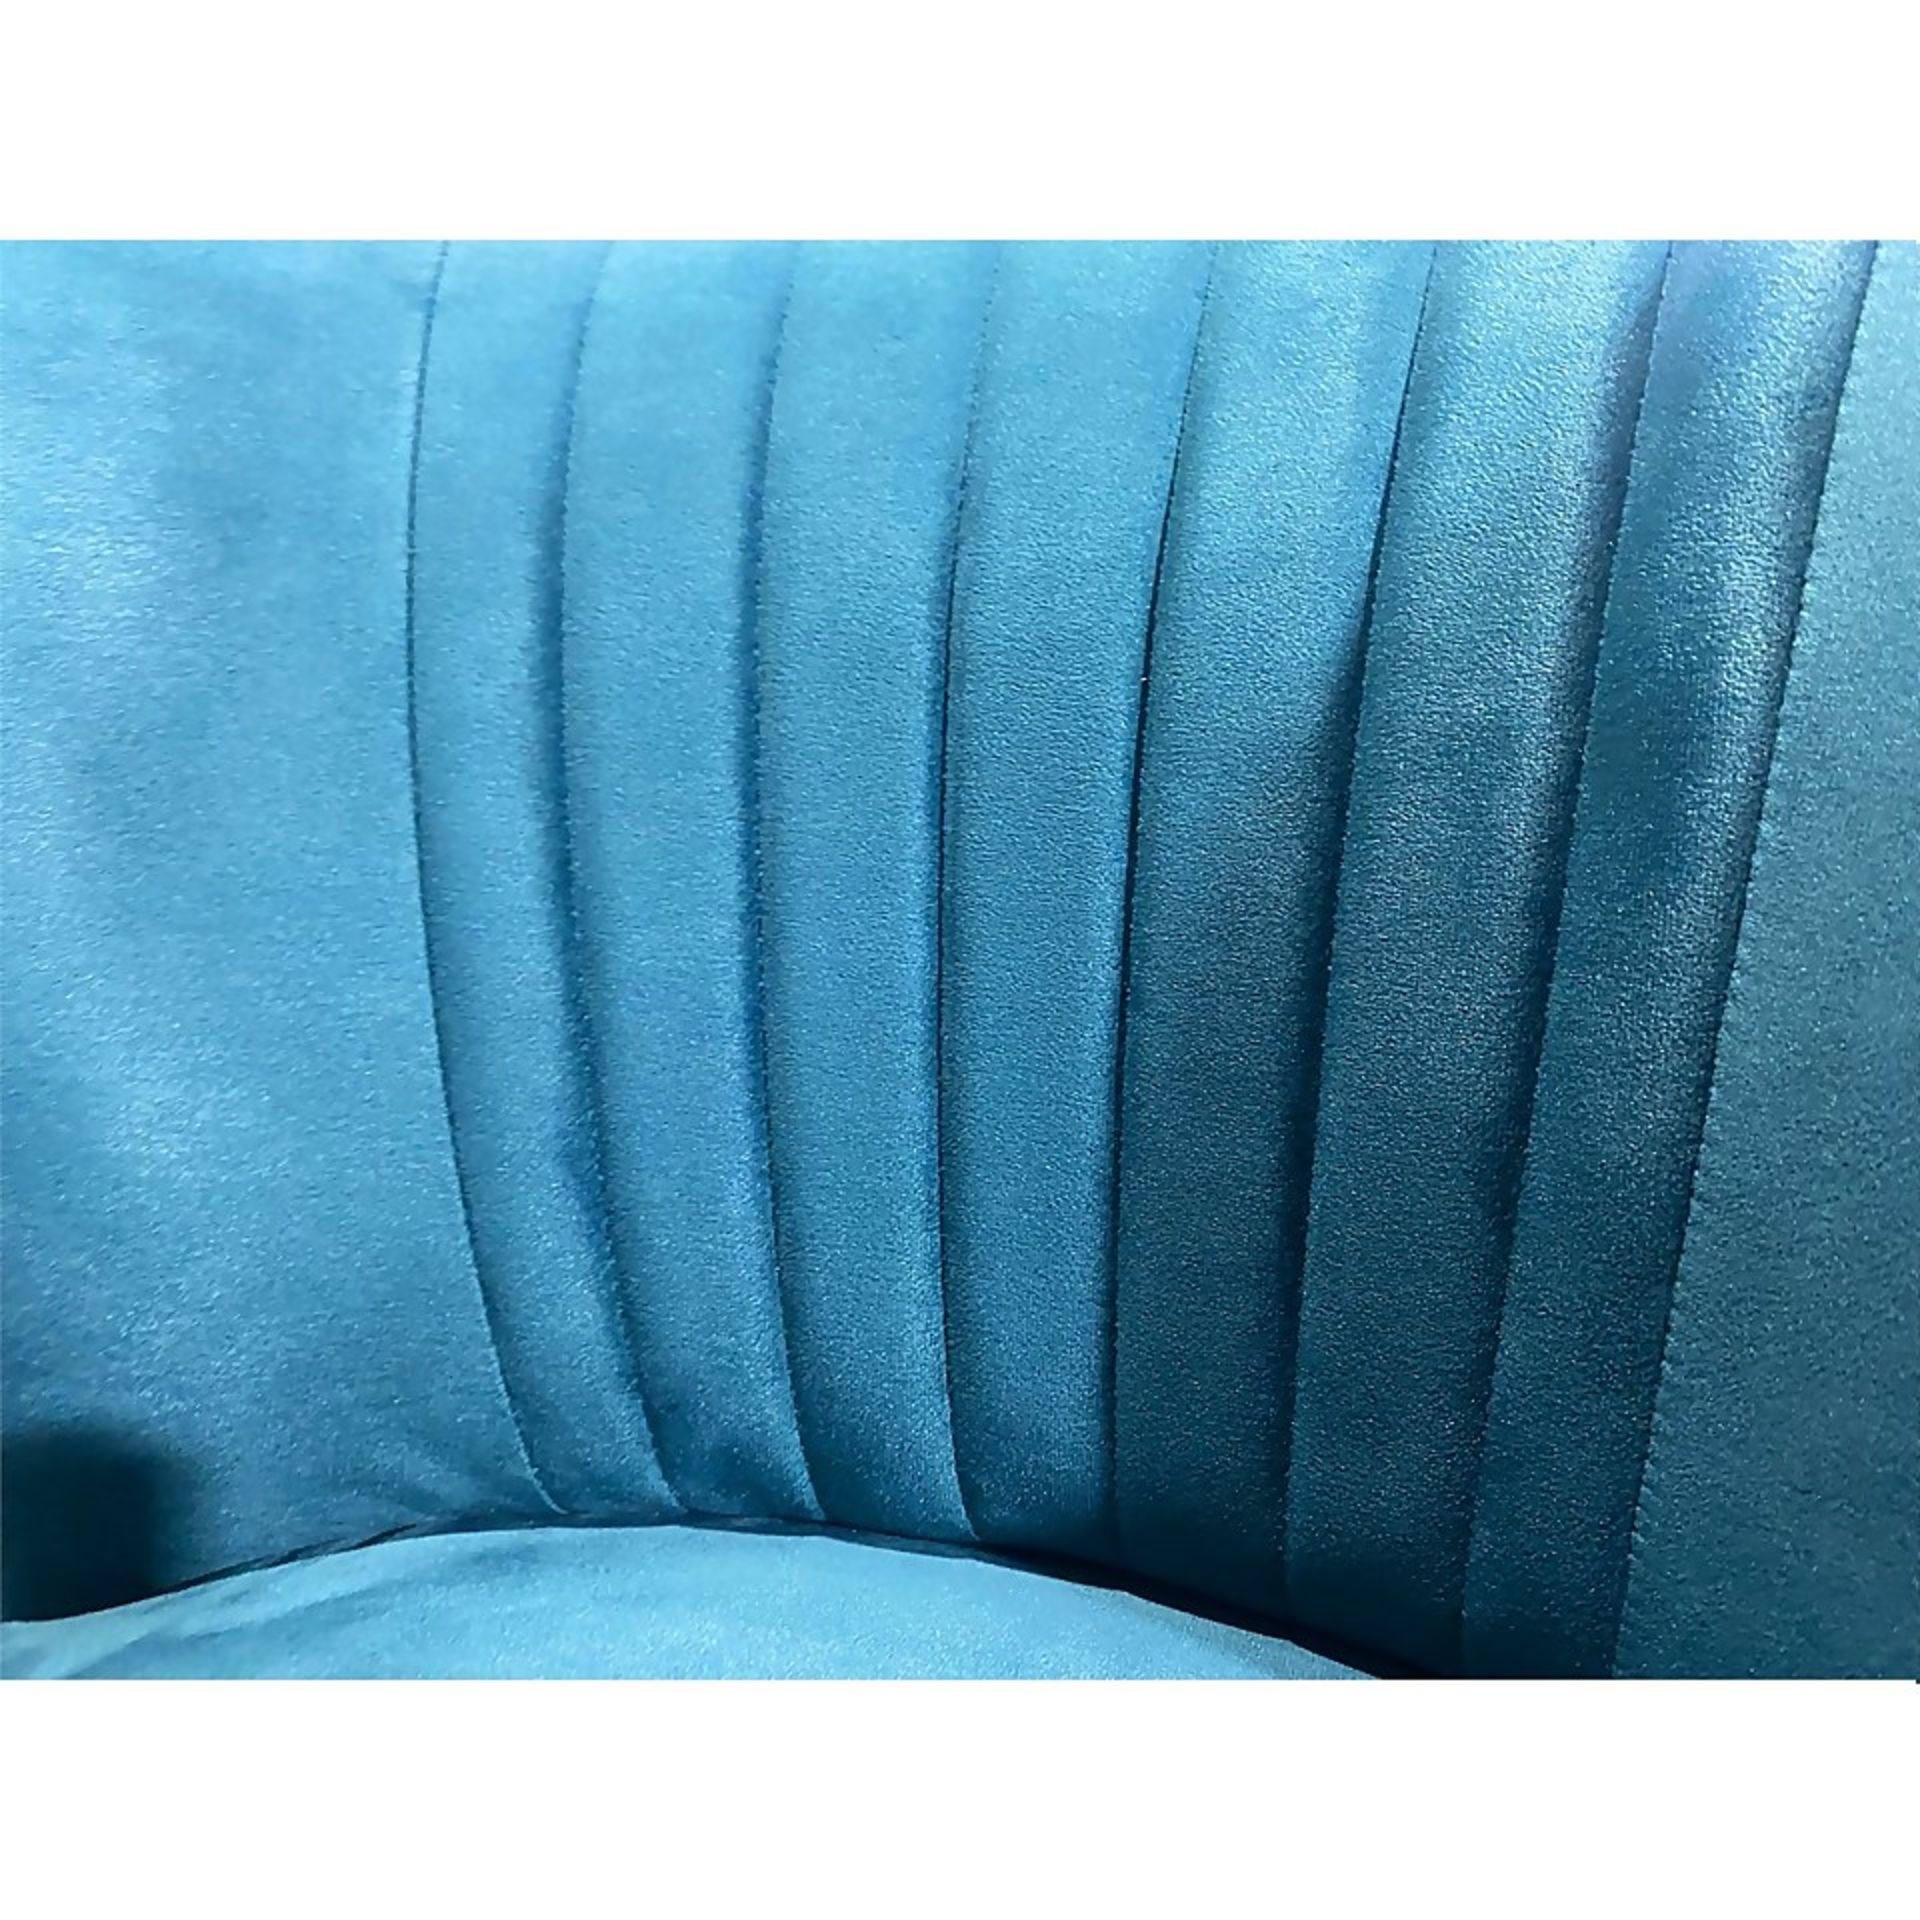 (R7M) 1 X Occasional Chair Teal. Velvet Fabric Cover. Rubberwood Legs. (H72xW60xD70cm) RRP £60 - Image 5 of 6